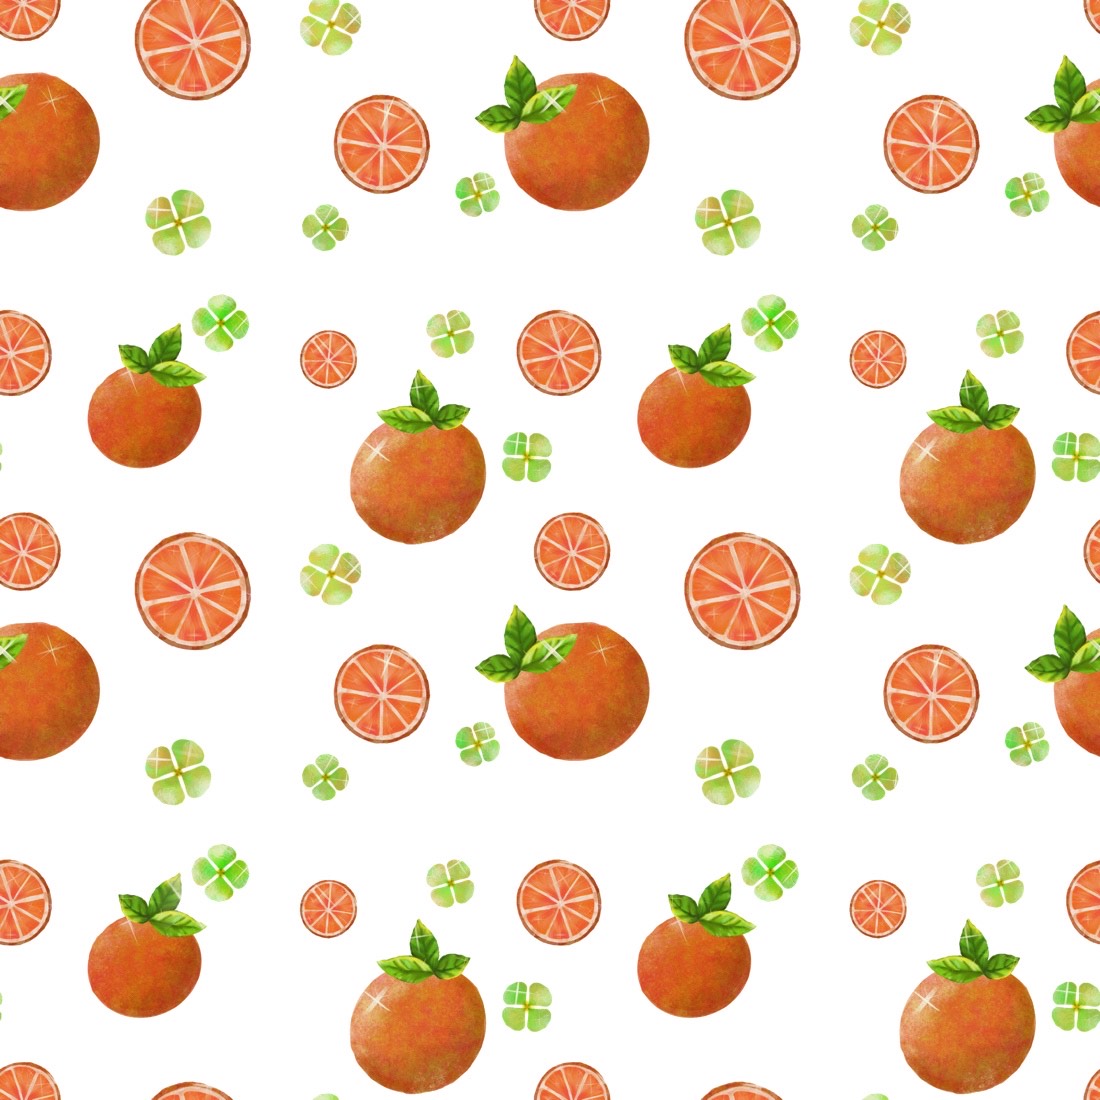 Pattern with oranges cover image.